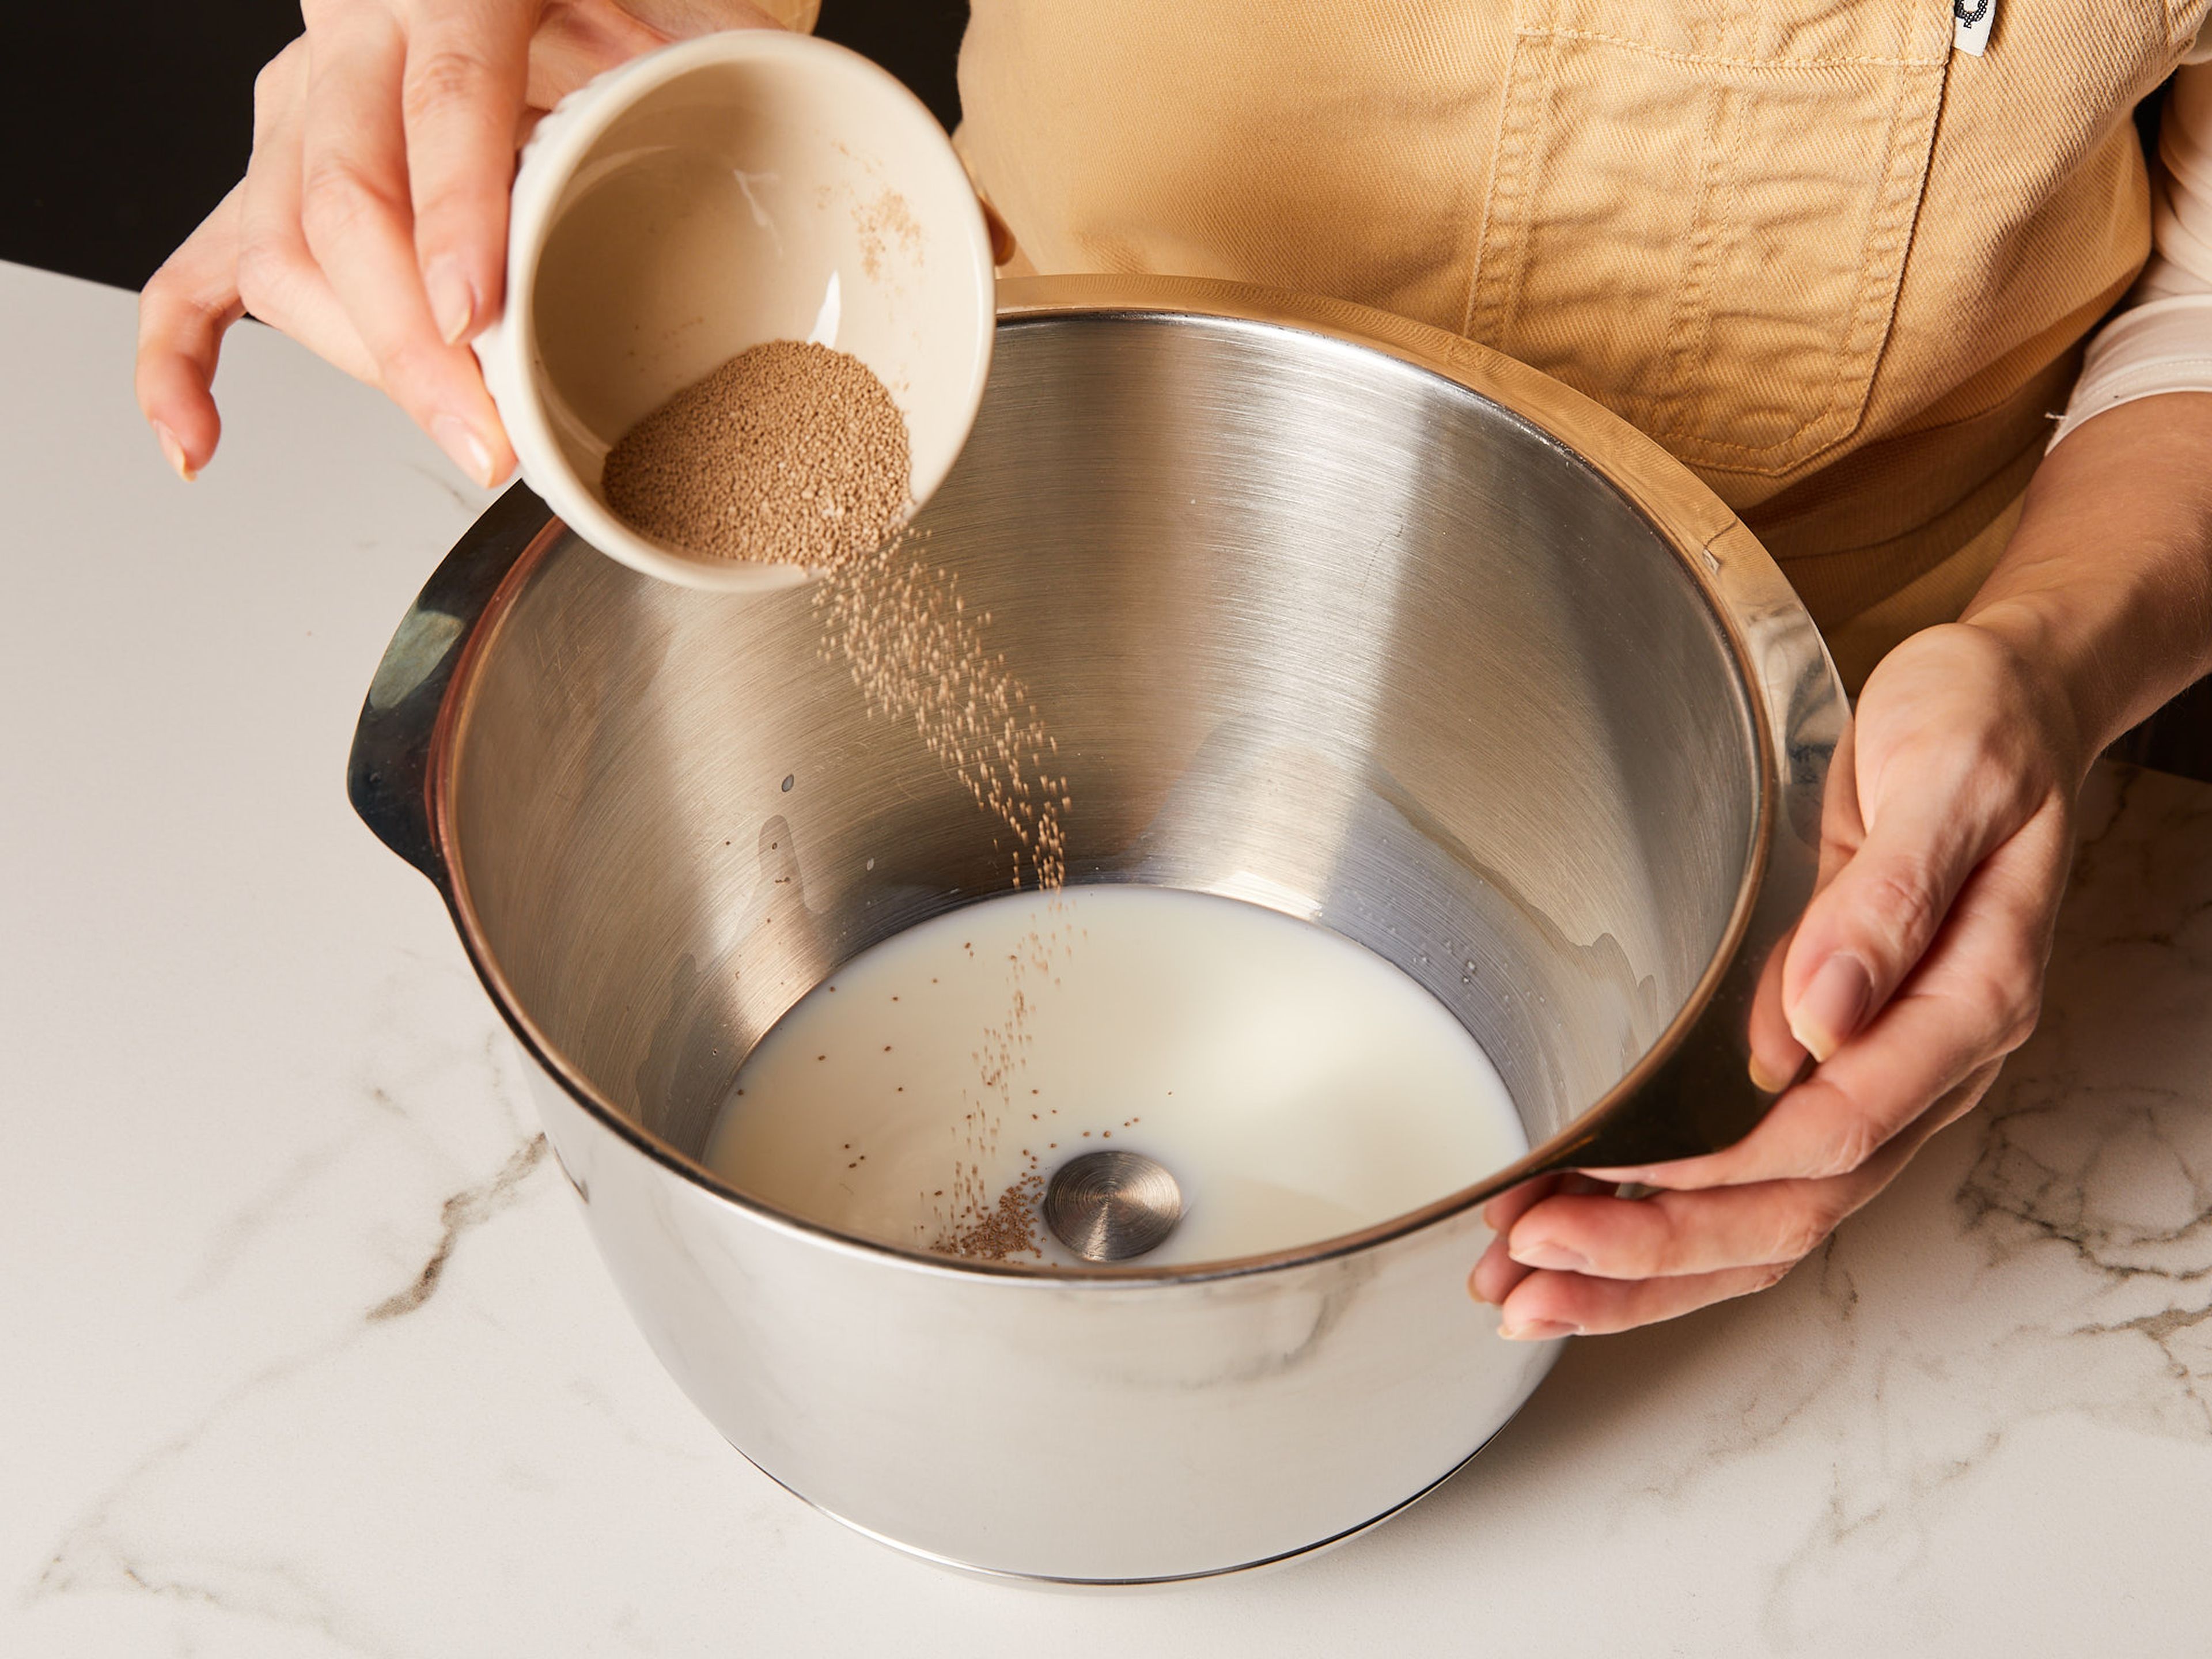 Mix the dry yeast and lukewarm milk together in a bowl, cover, and set aside for approx. 10 min. until it turns foamy.